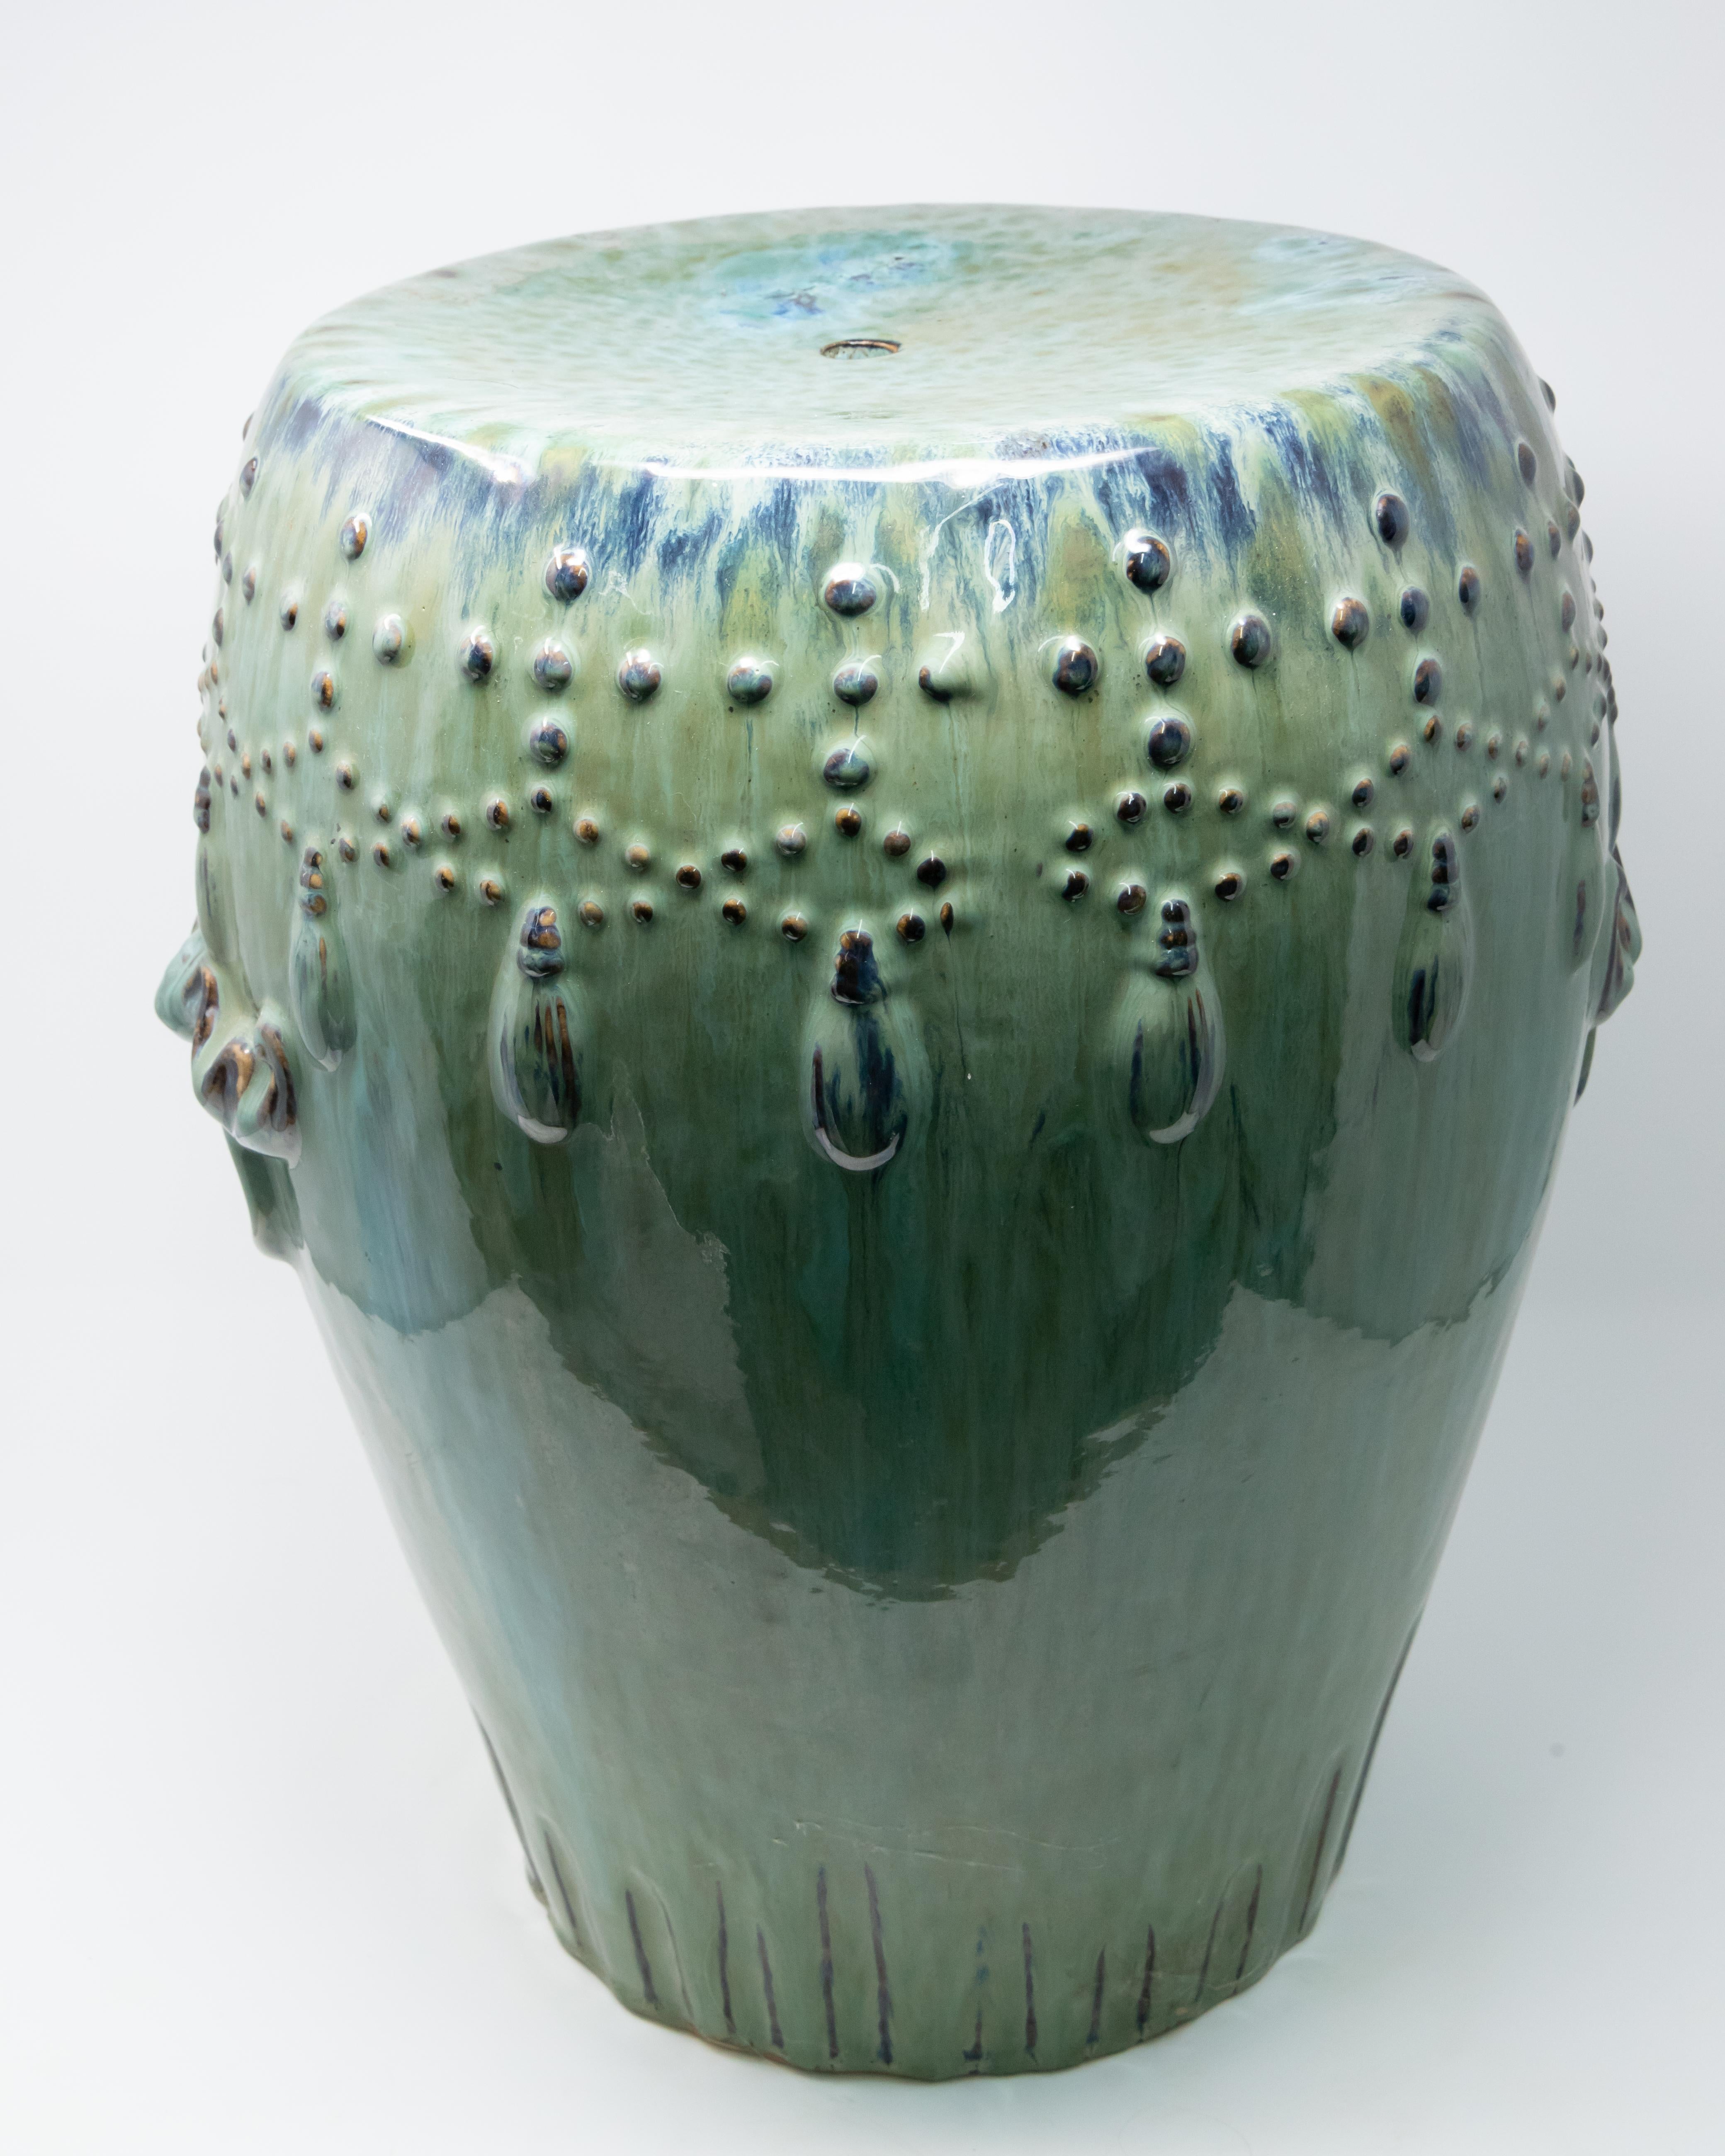 Offering this superb Asian garden stool. Hand-thrown terra cotta, with striking turquoise glaze. Starts on a round bottom that gets larger as it goes up. Has to open handles to either side and a drain hole in the top. Around the top has raised dots